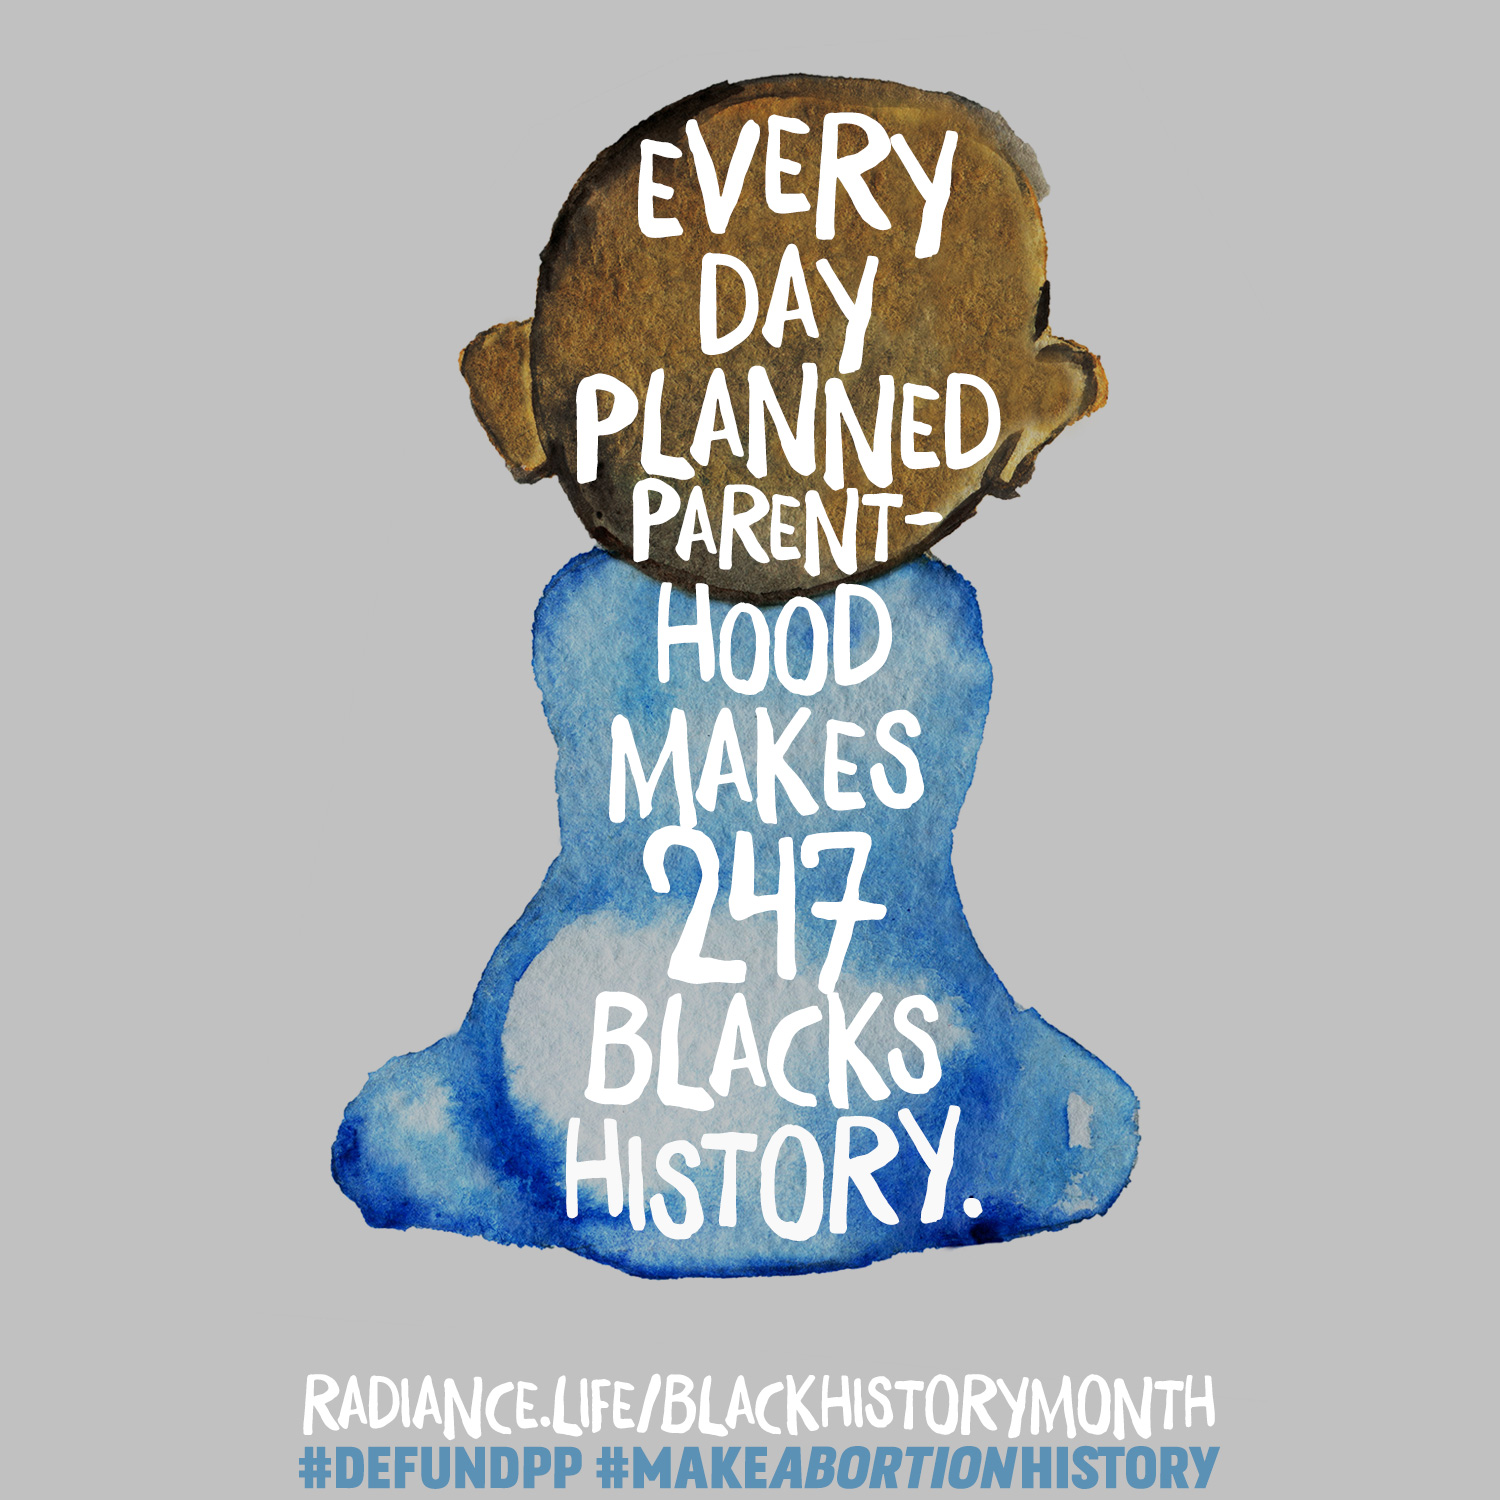 "Make Planned Parenthood History" by The Radiance Foundation